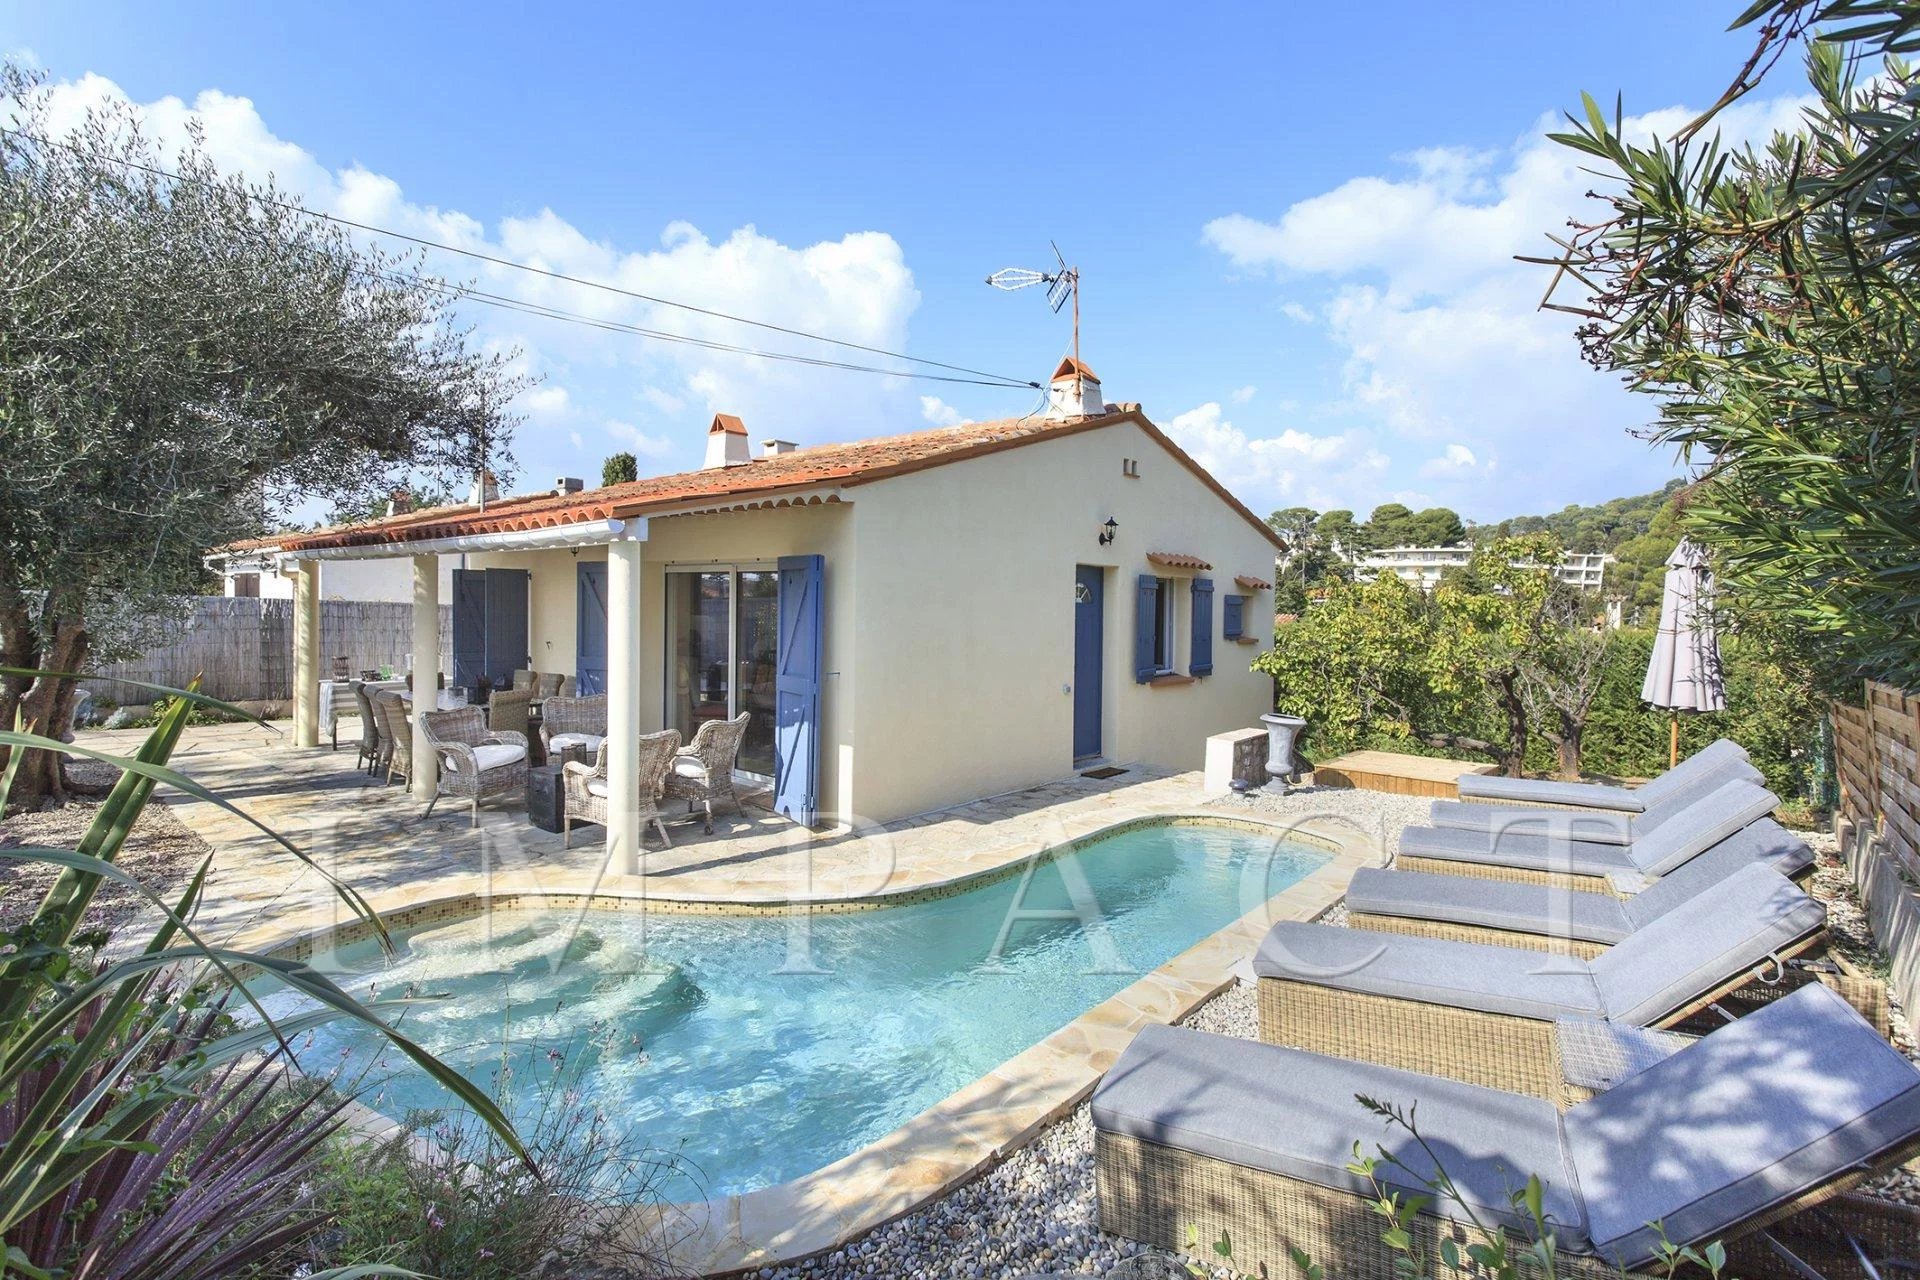 Nice Villa to Rent Cannes Close to City Center